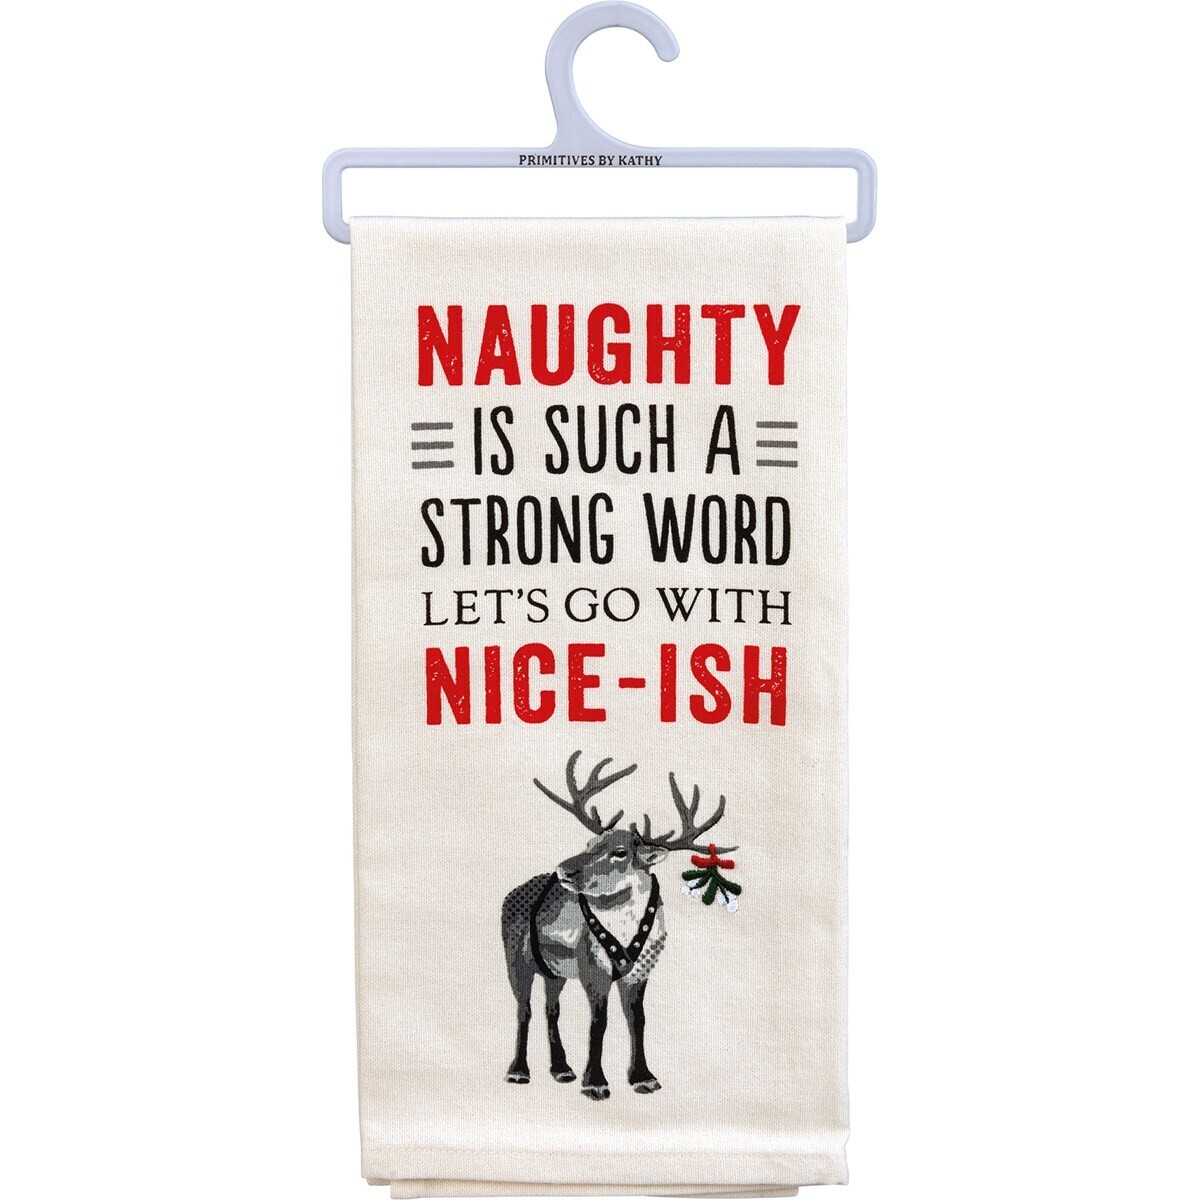 Naughty Let's Go With Nice Ish Kitchen Towel